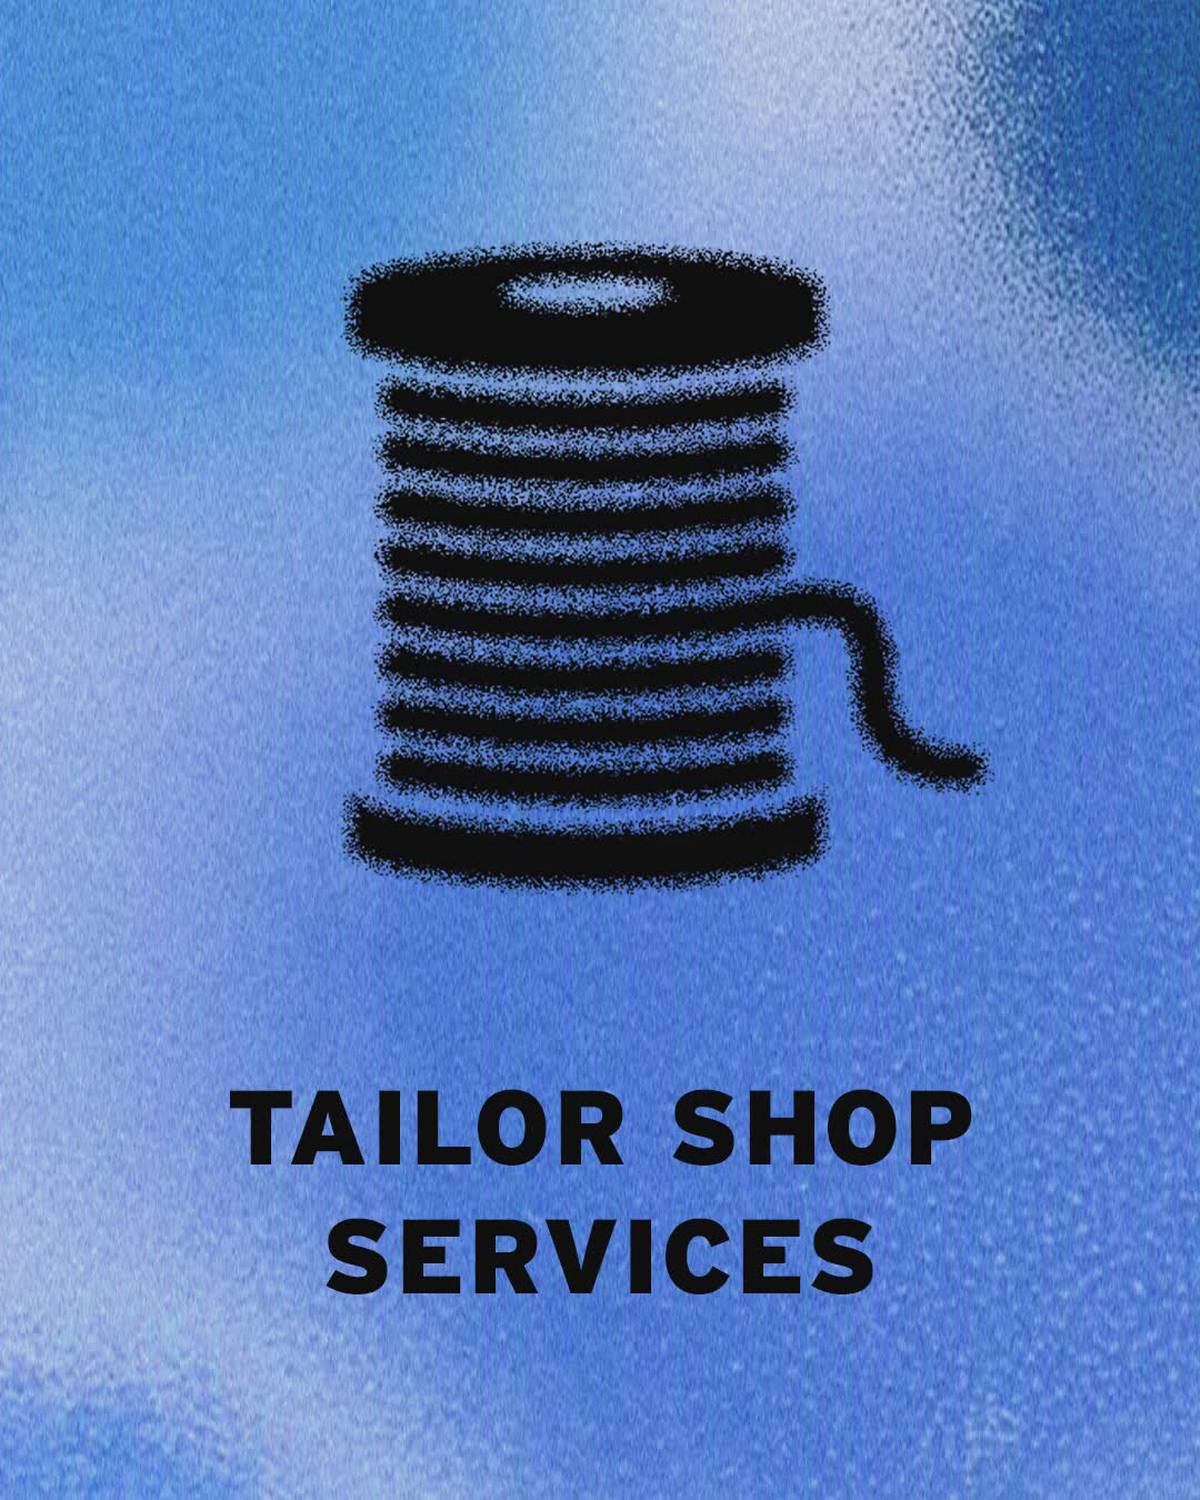 Icon of a thread and the words "Tailor Shop Services" overlayed on a blue background.